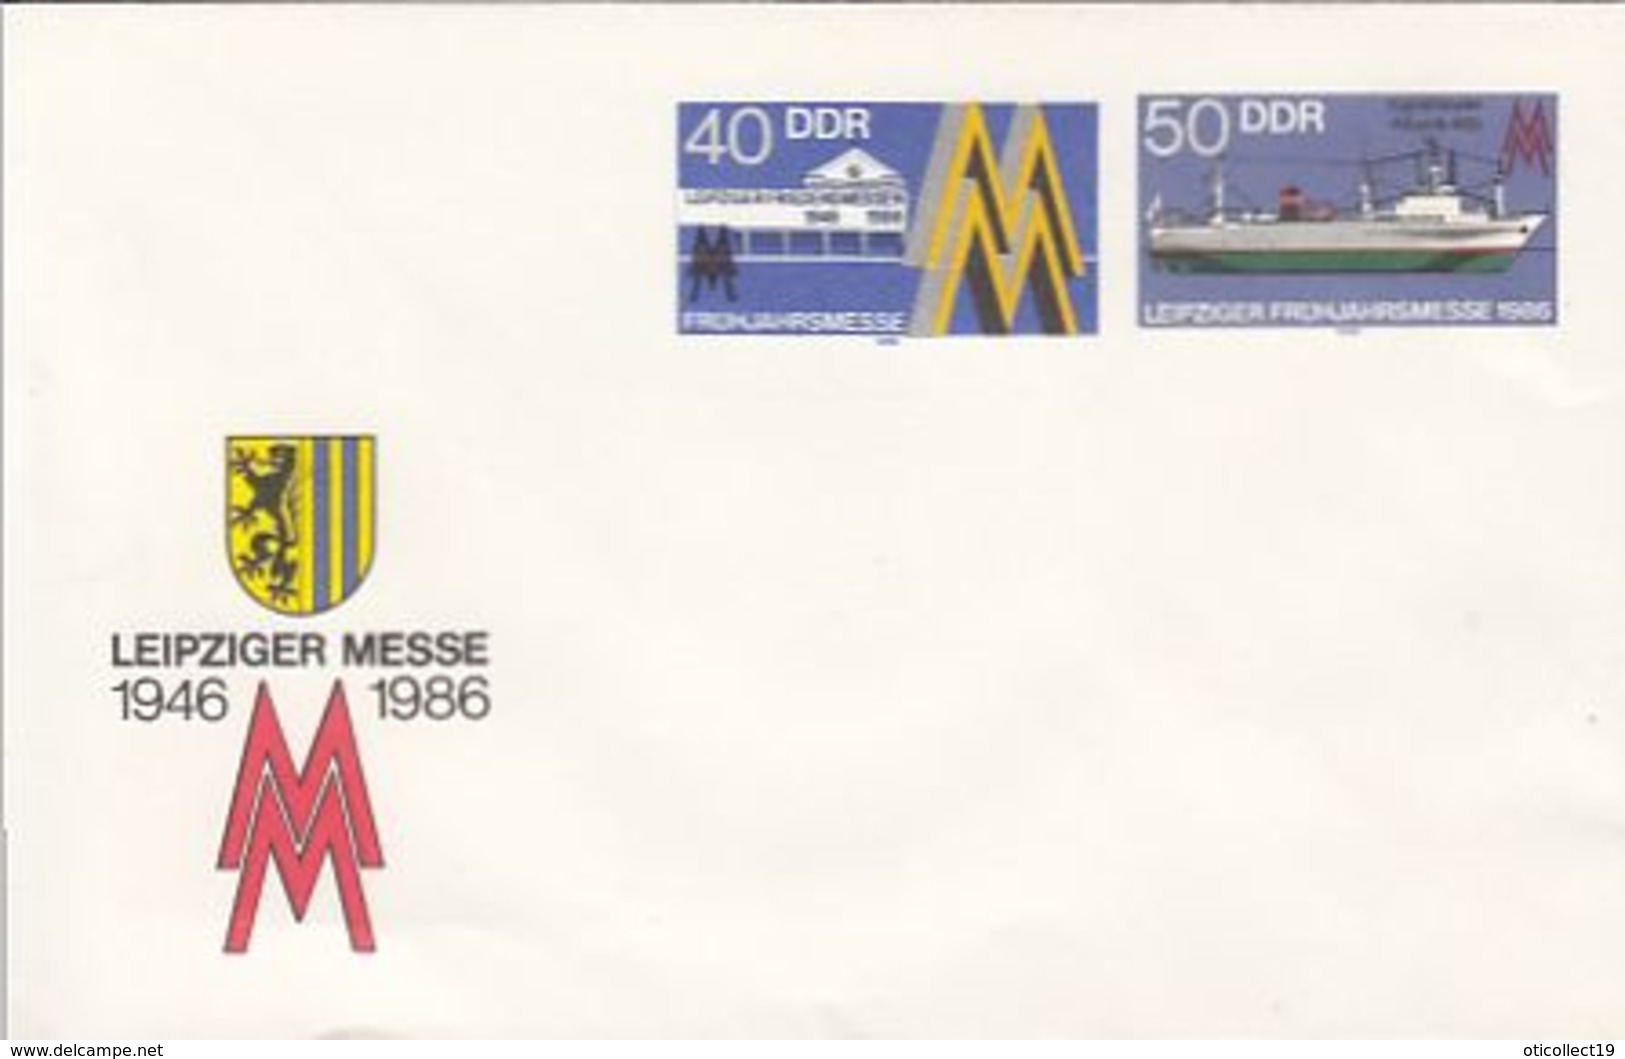 LEIPZIG FAIR, COAT OF ARMS, SHIPP, COVER STATIONERY, 1986, GERMANY-DDR - Umschläge - Ungebraucht